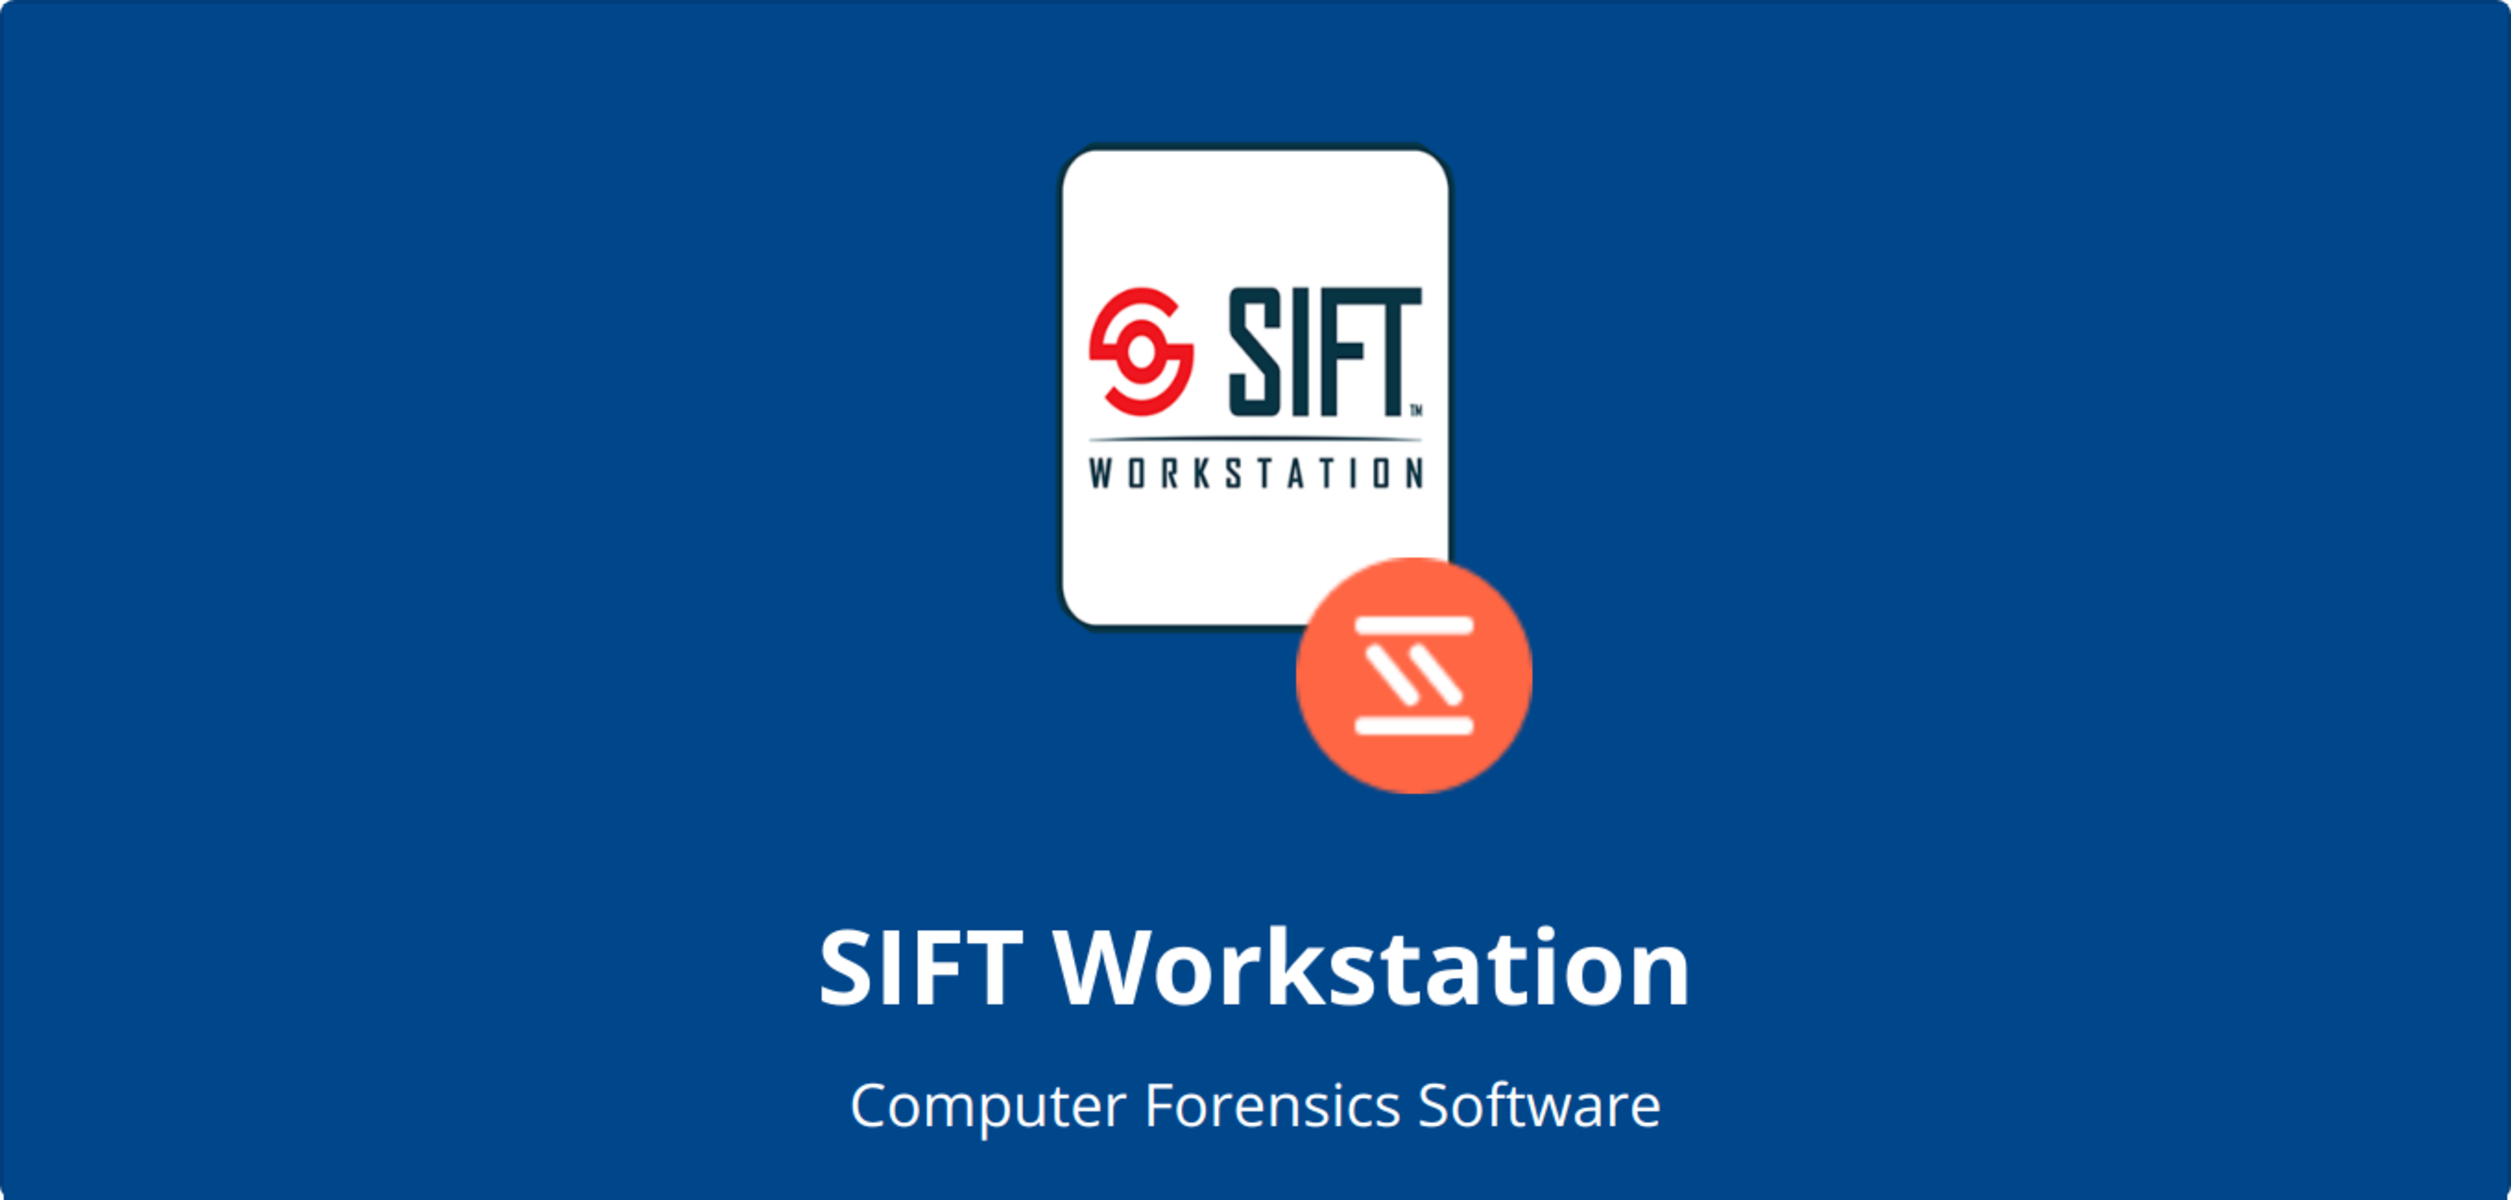 How To Use SIFT Workstation